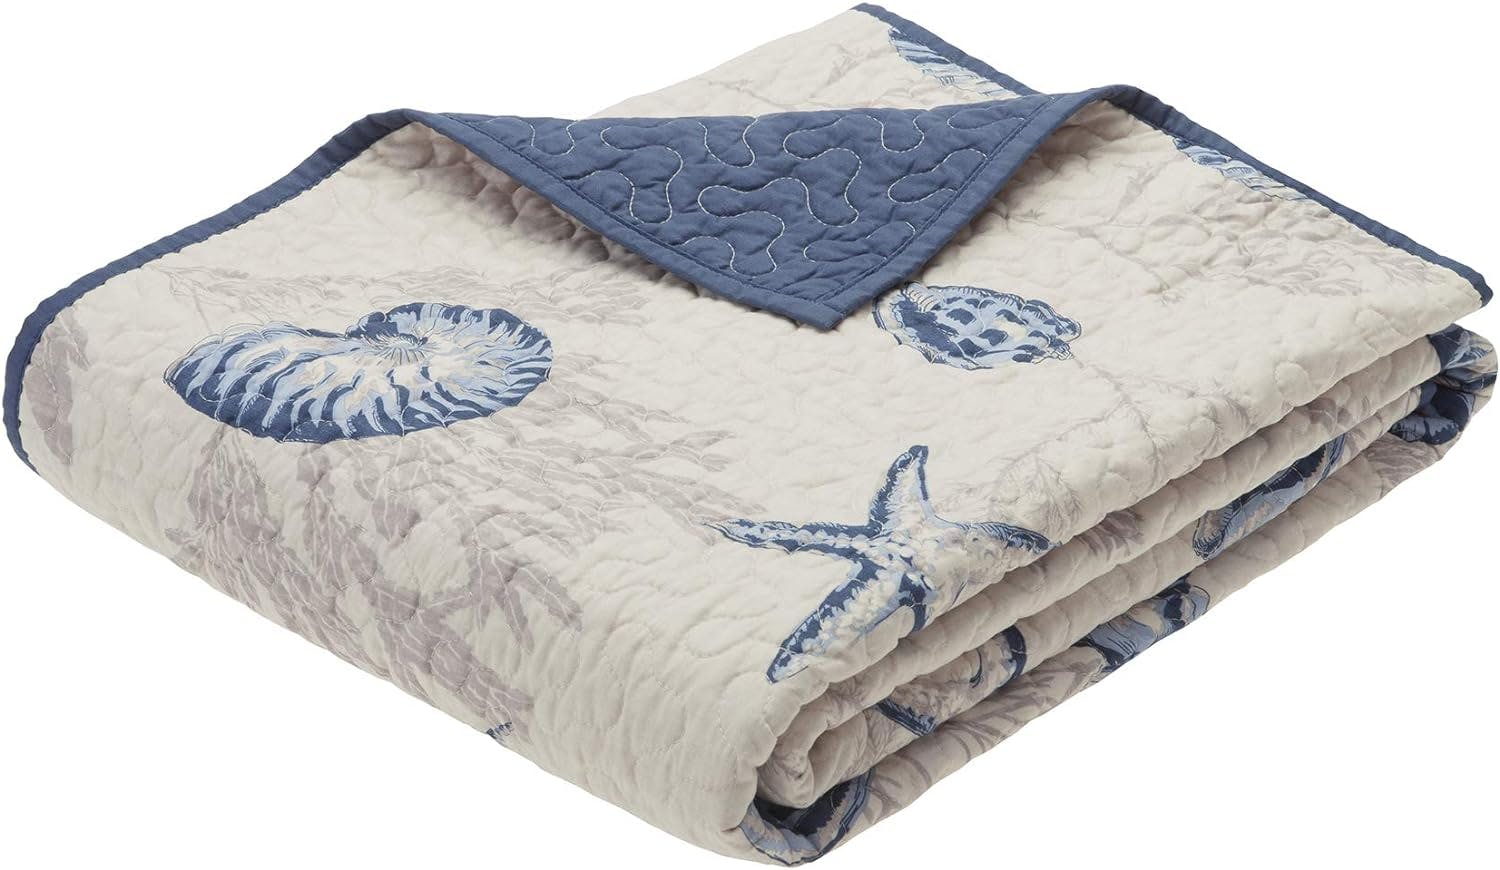 Bayside Oversized Quilted Throw in Ivory and Navy Blue 60"x70"